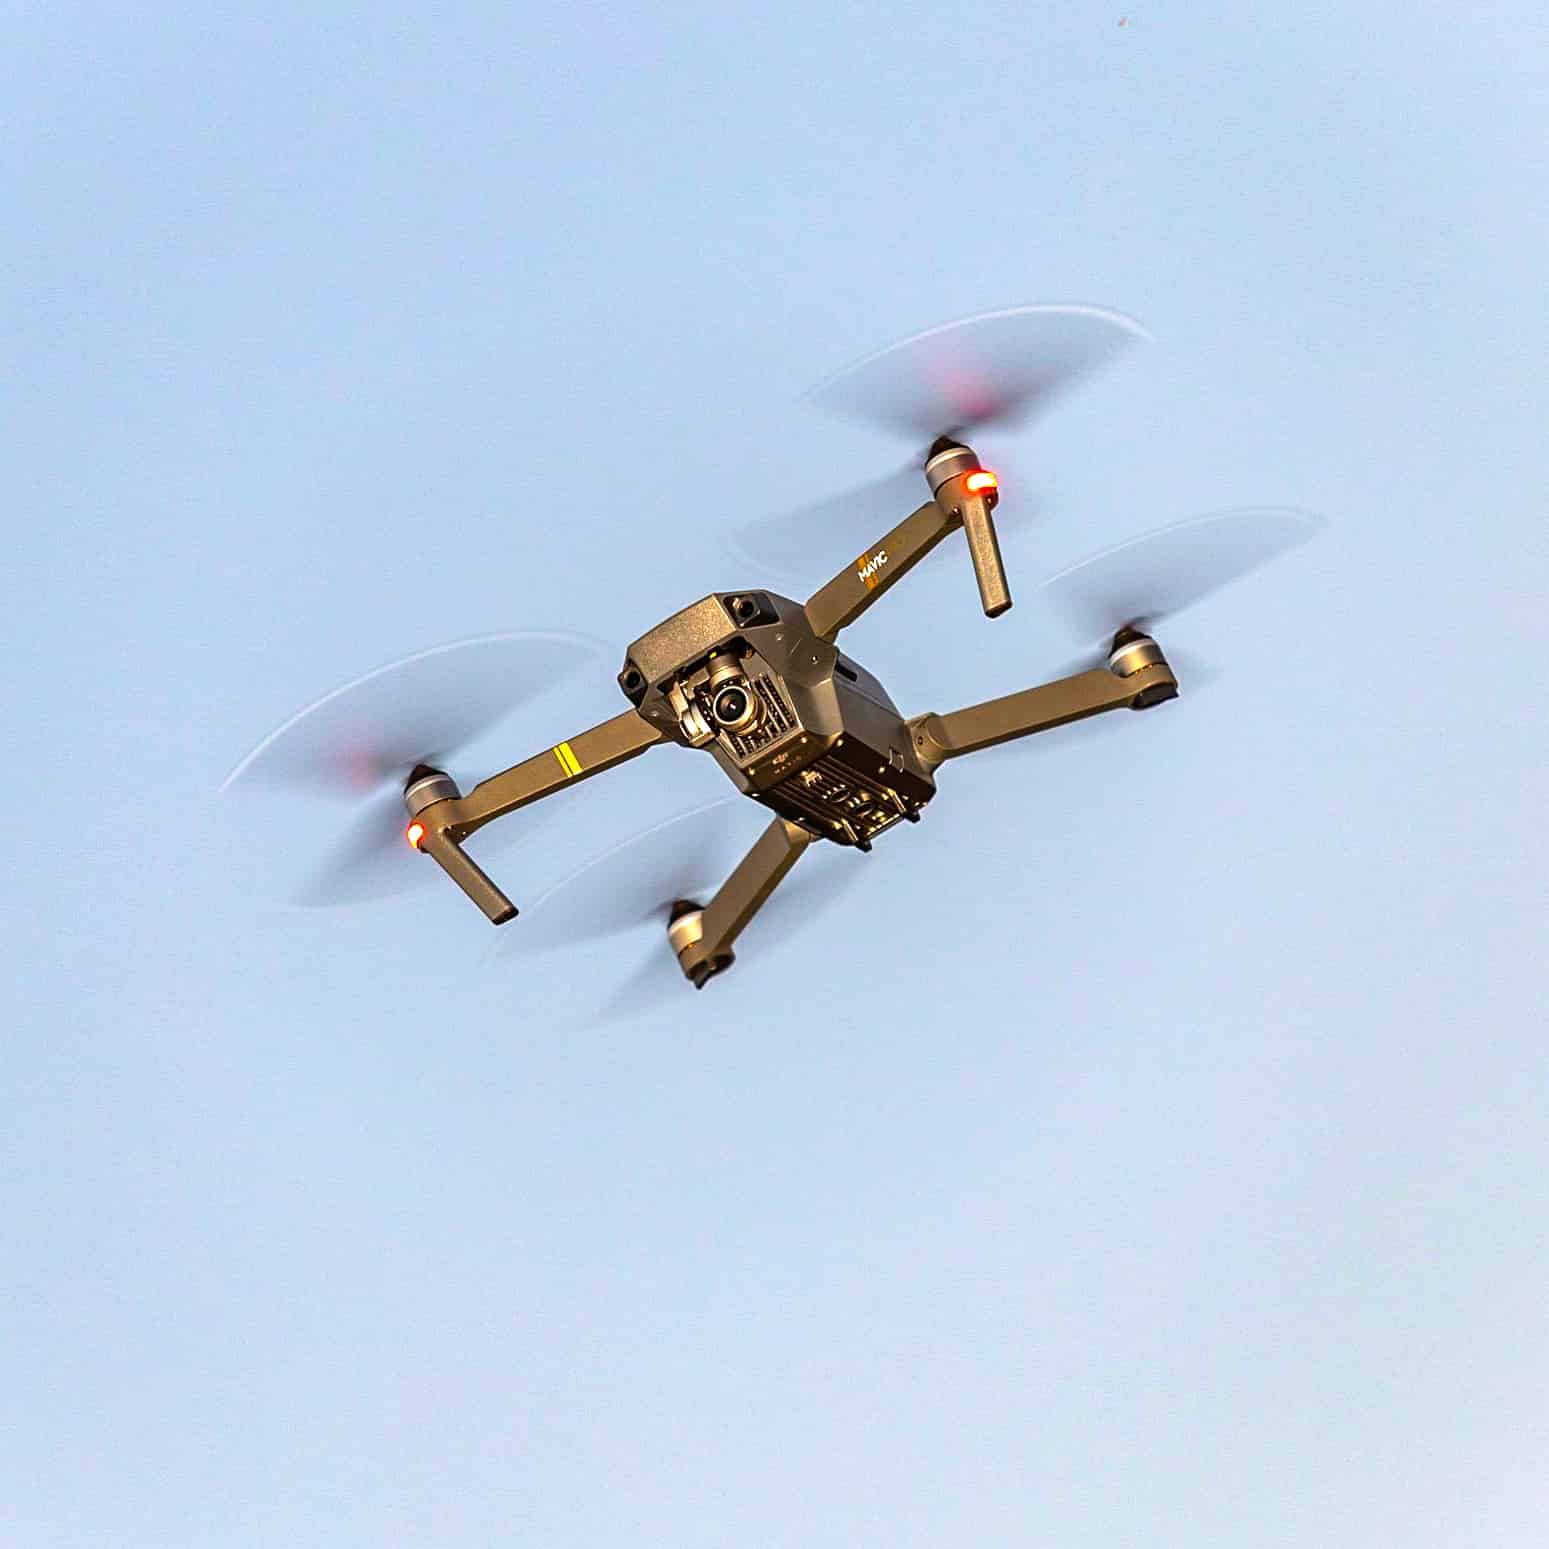 Image of a drone in flight